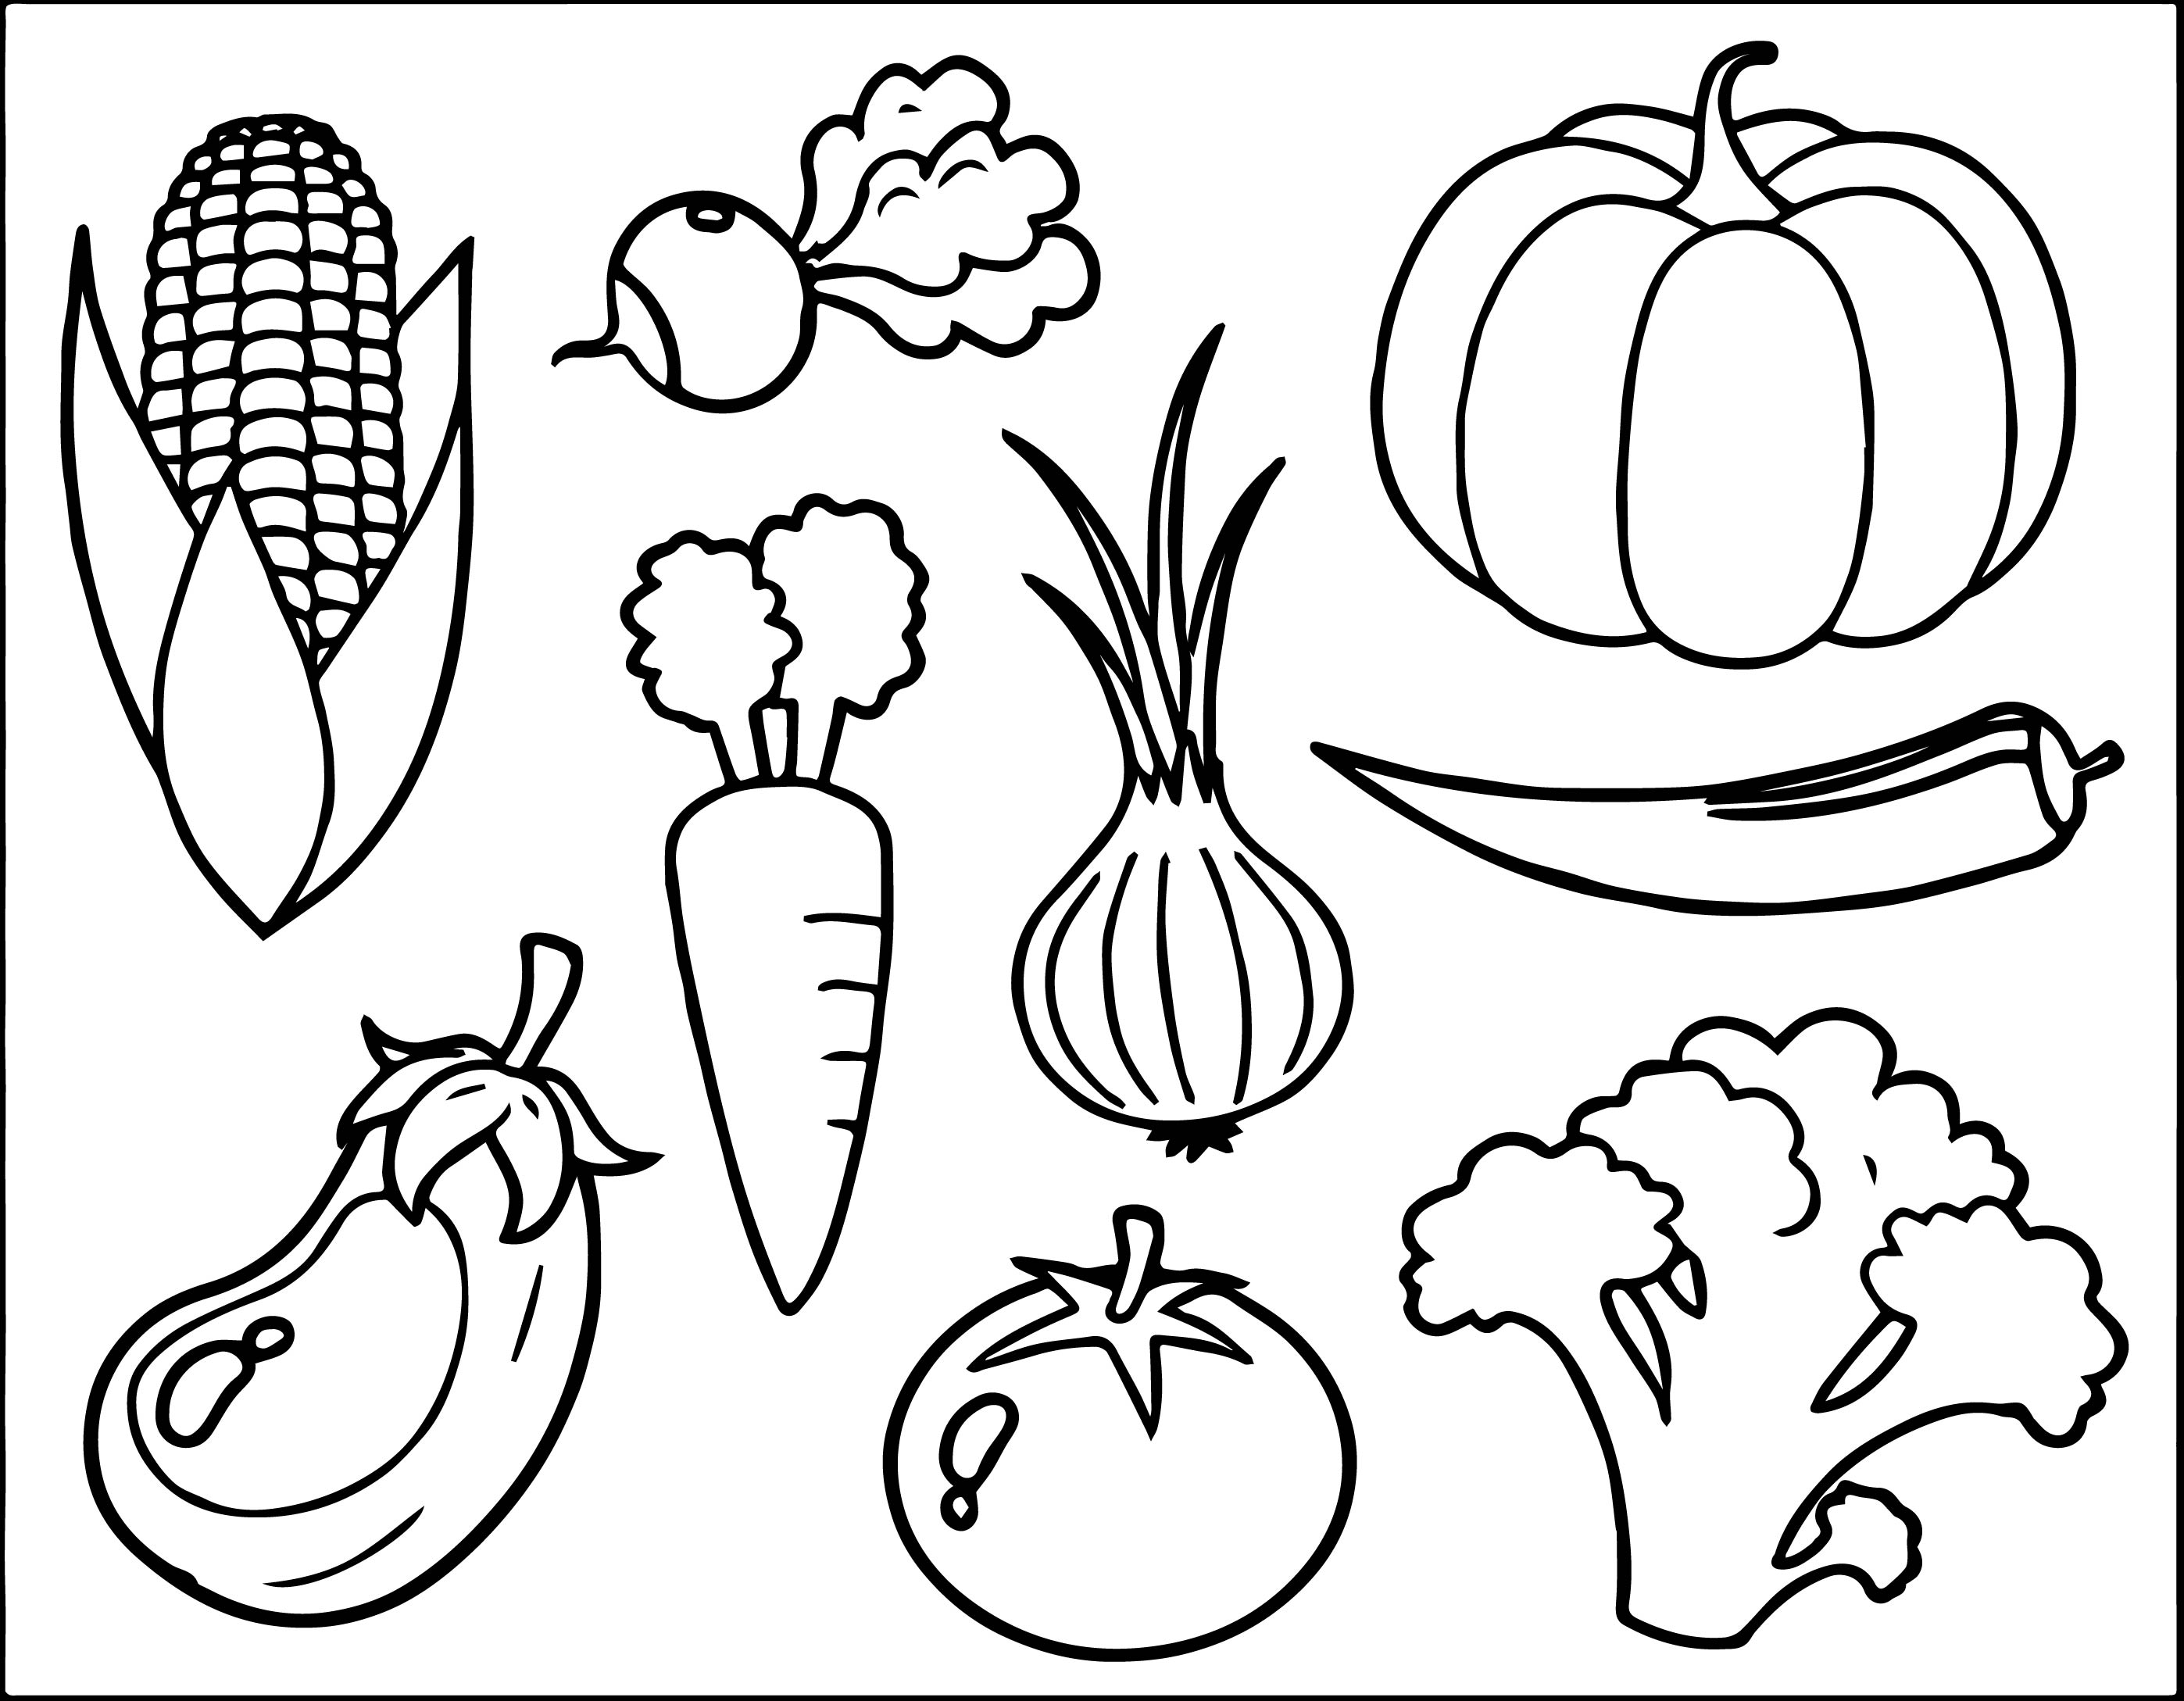 free-printable-vegetable-coloring-pages